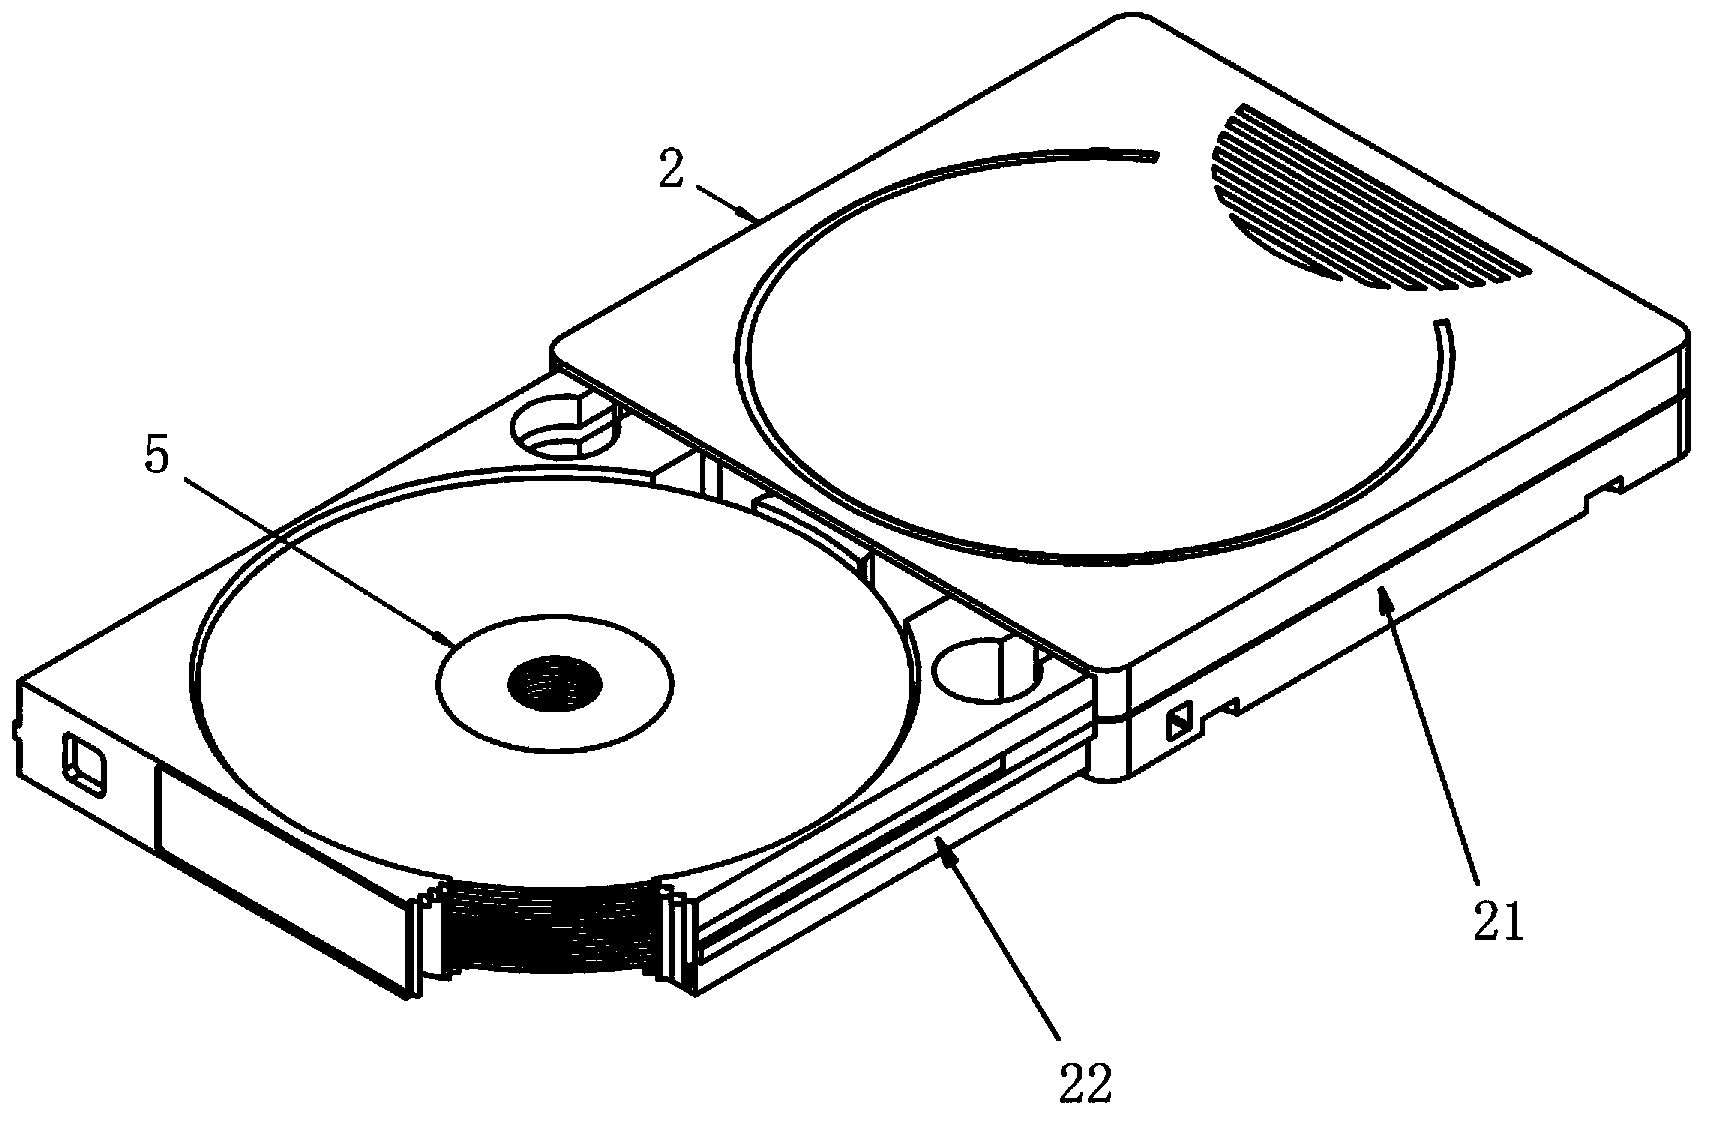 Optical disk library and random grabbing method for multiple directly laminated optical disks of optical disk library